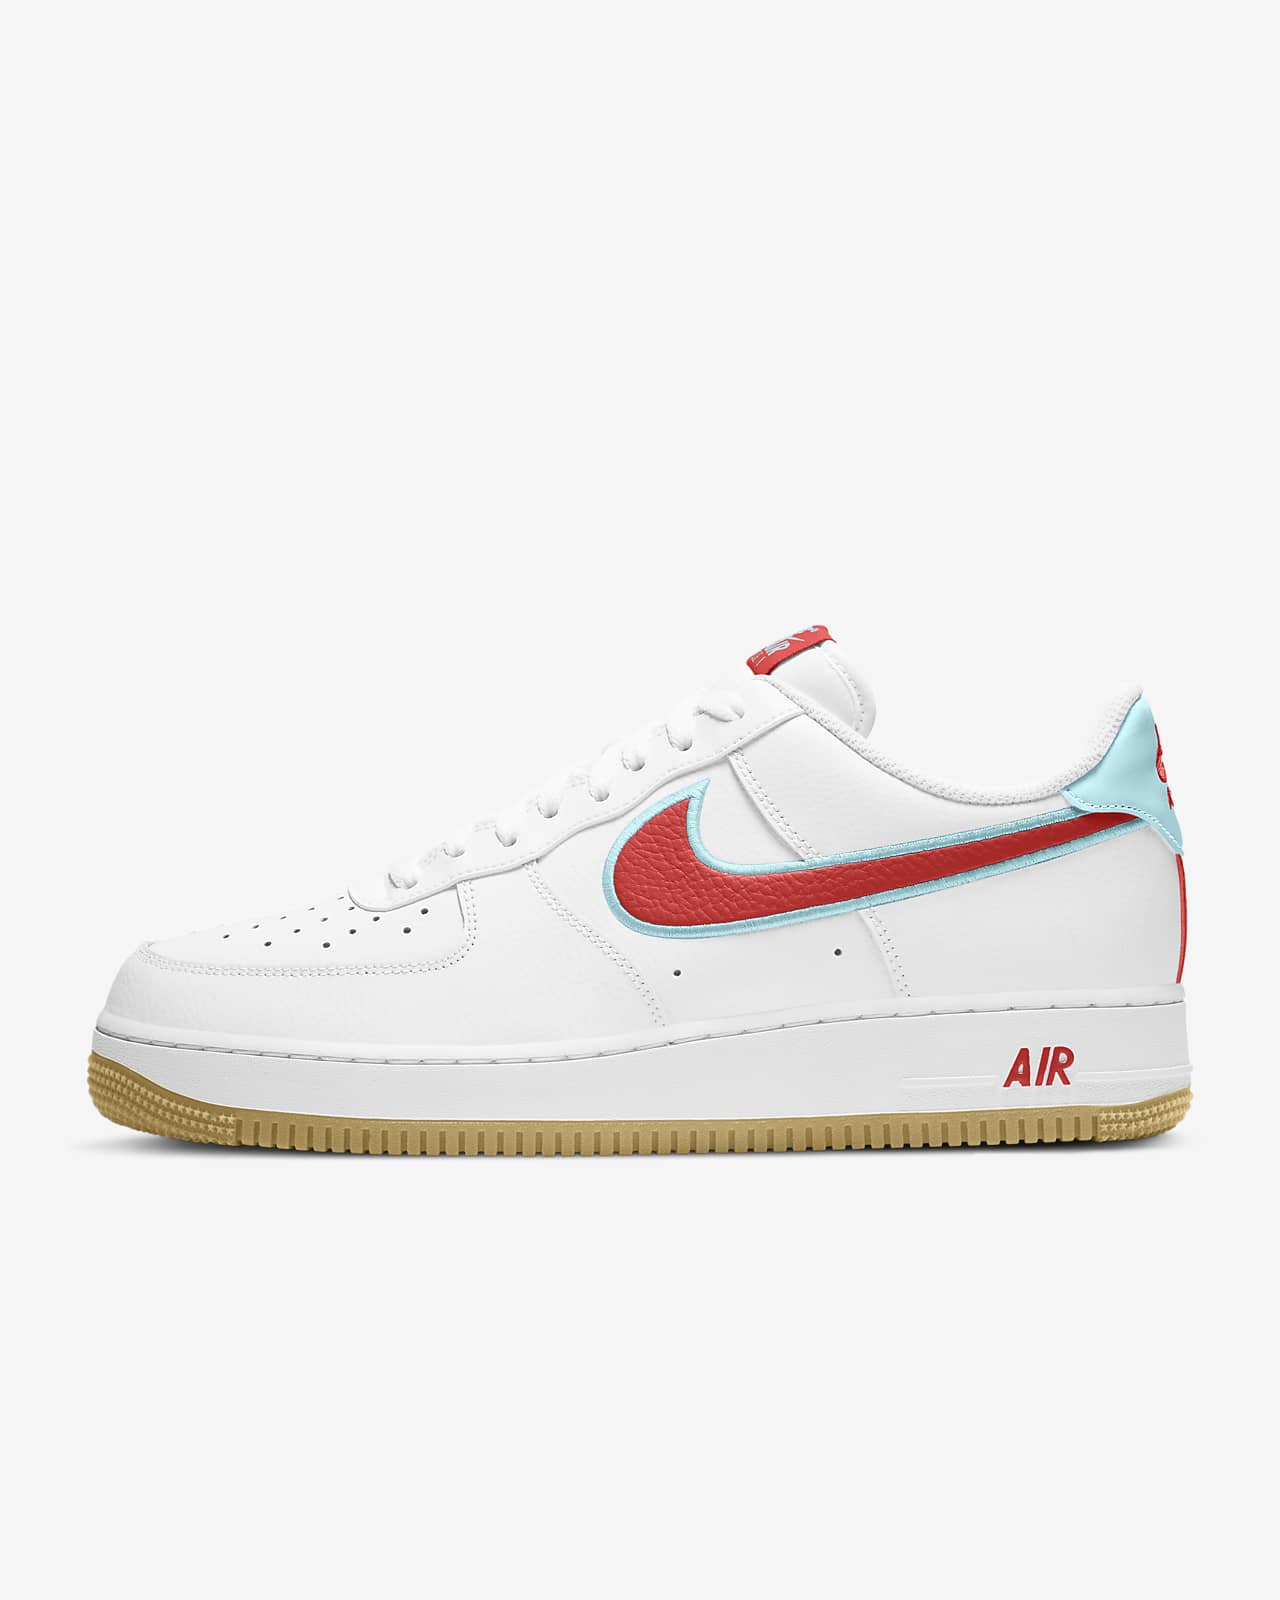 nike homme chaussures air force 1 marron